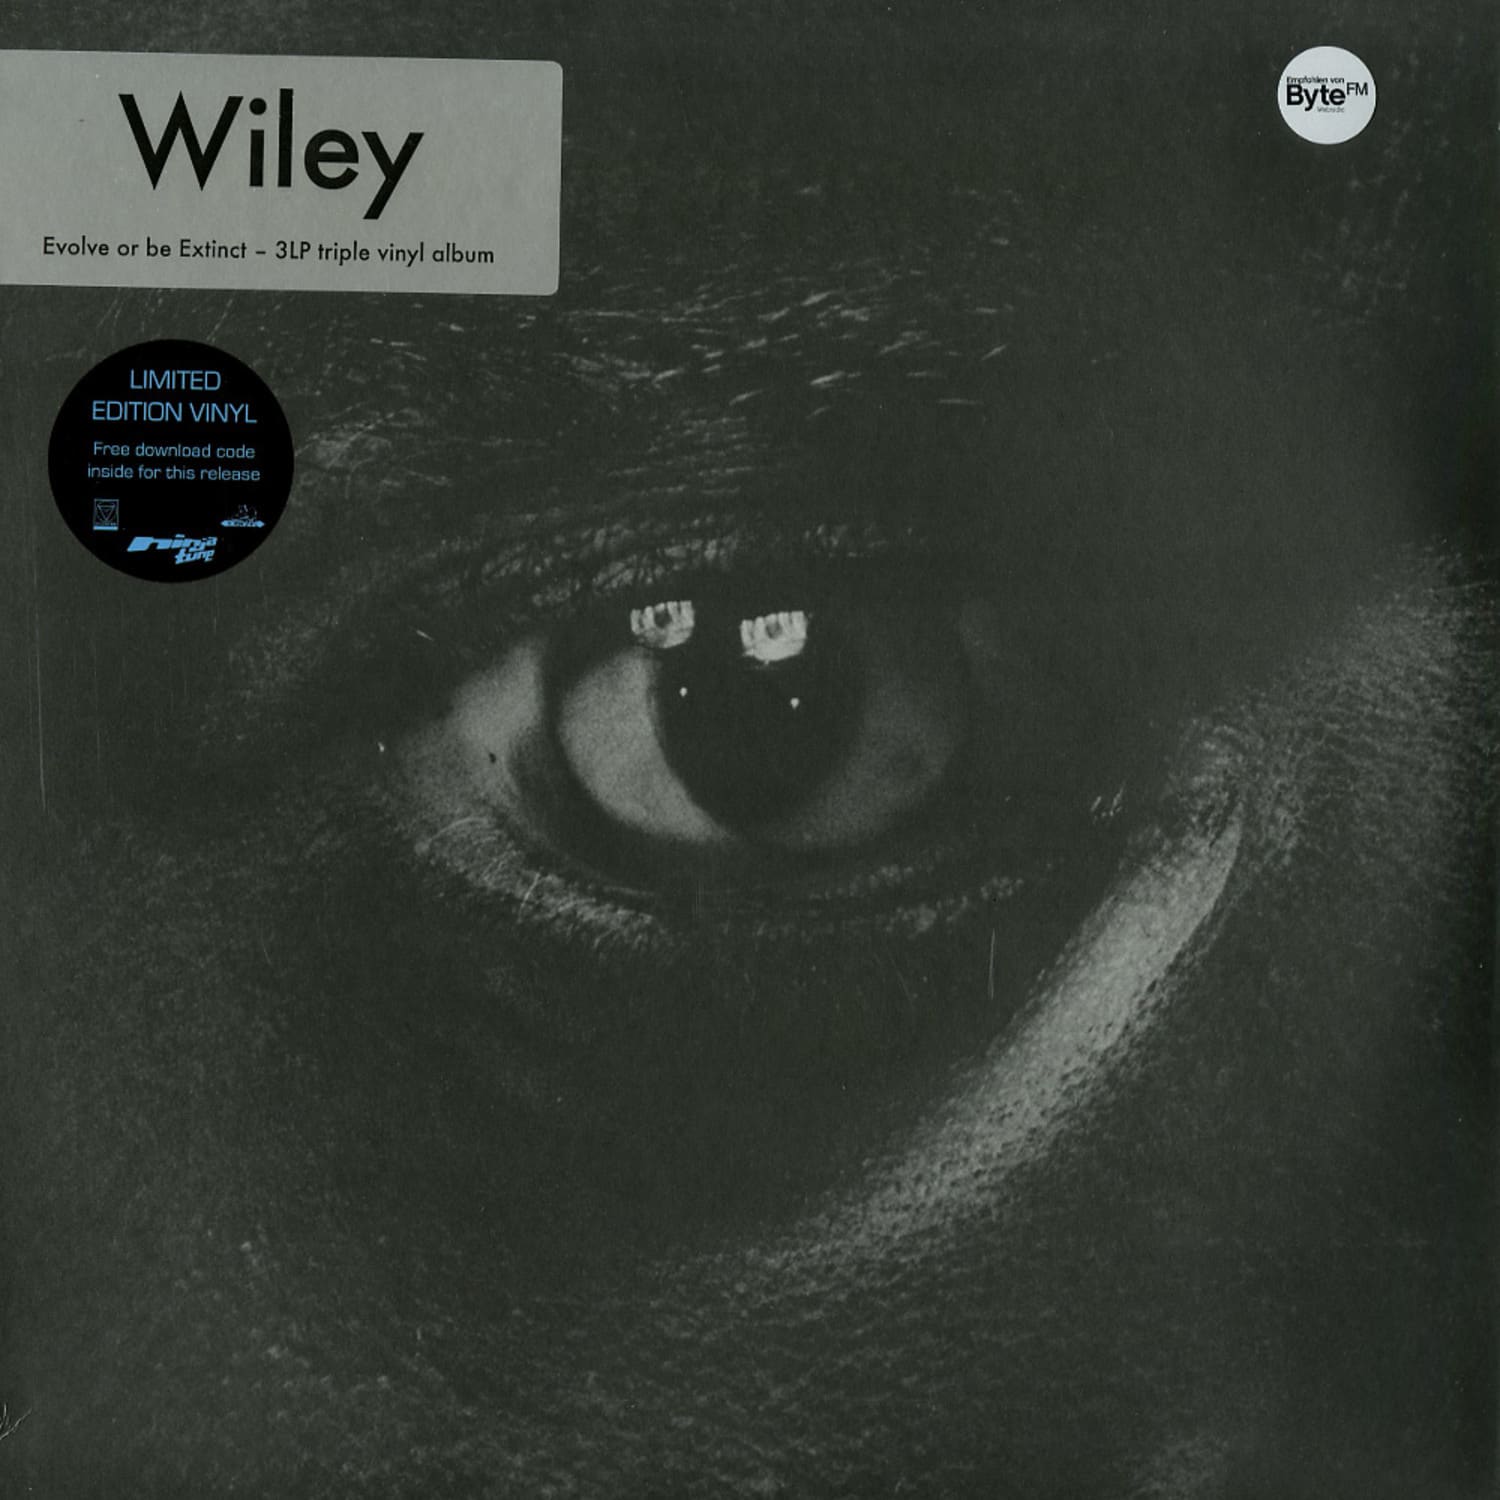 Wiley - EVOLVE OR BE EXTINCT 